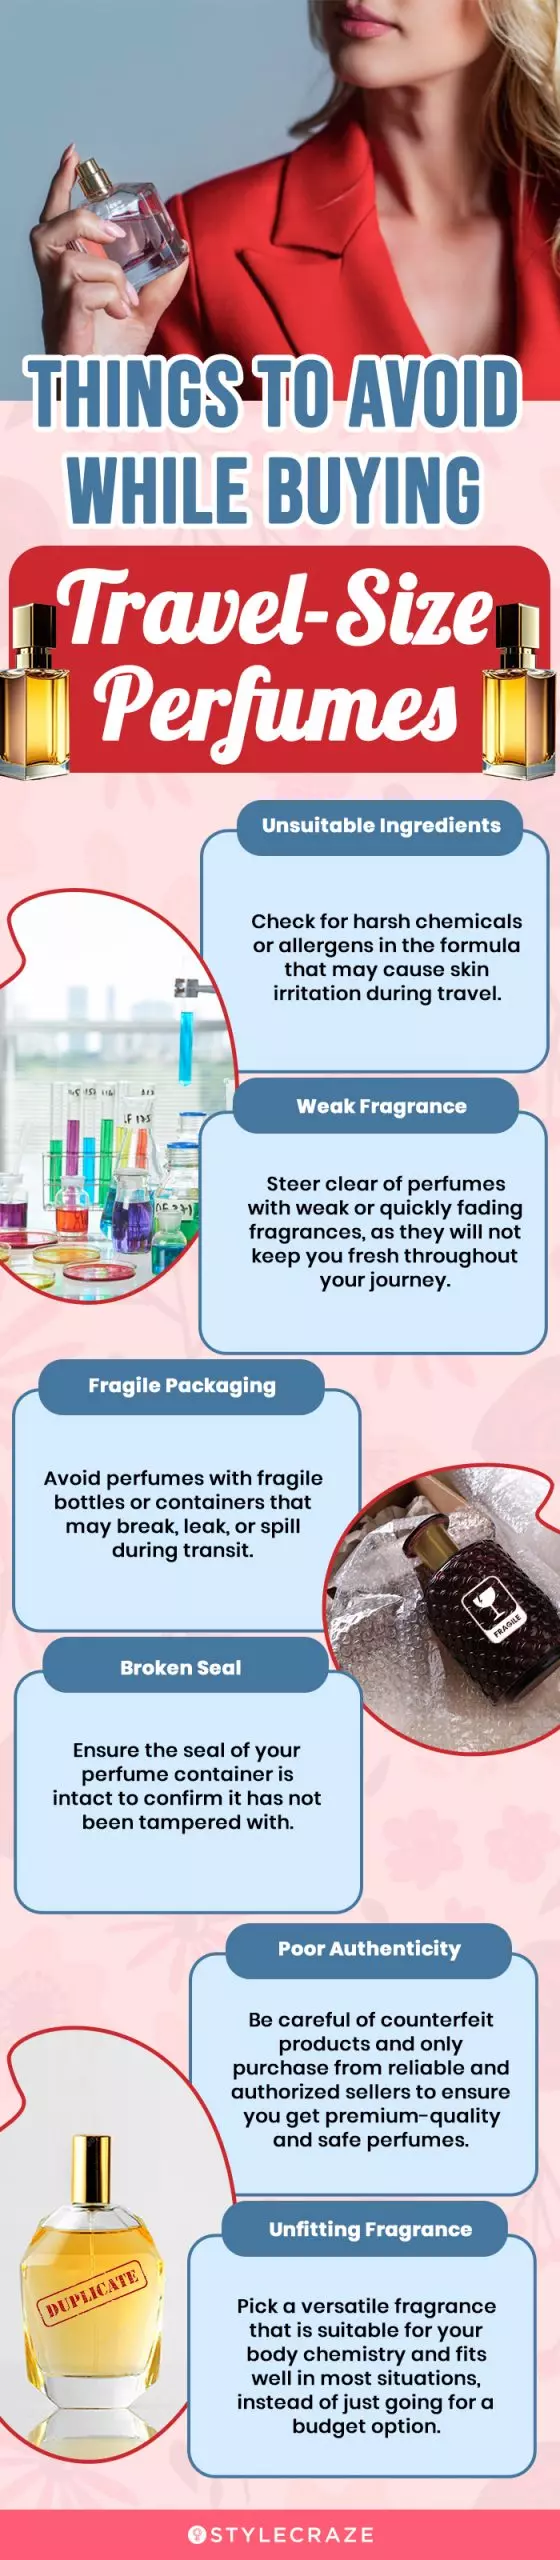 Things To Avoid While Buying Travel-Size Perfumes (infographic)